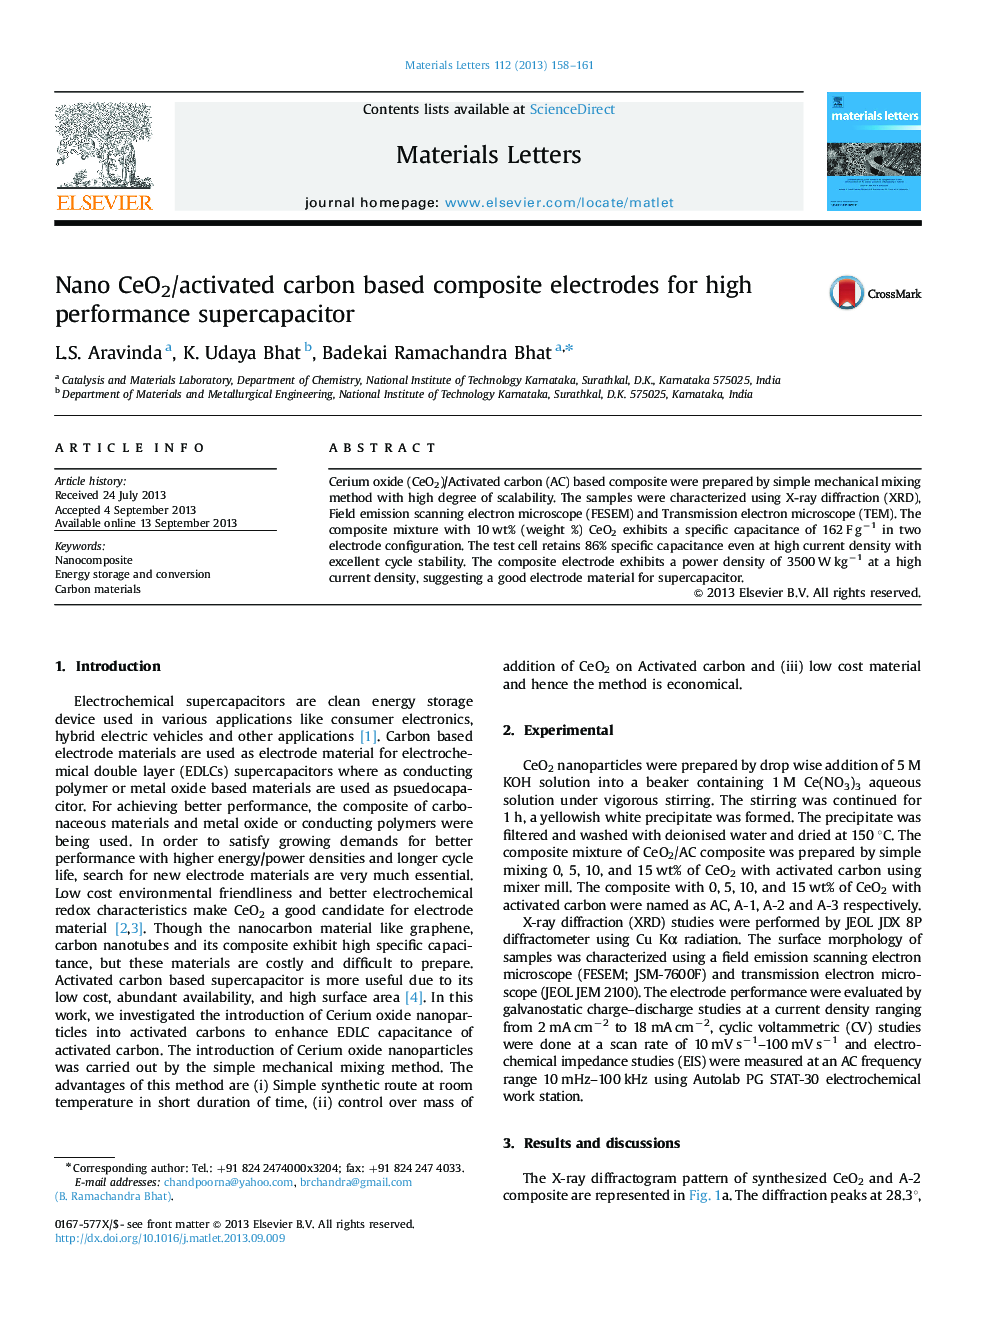 Nano CeO2/activated carbon based composite electrodes for high performance supercapacitor